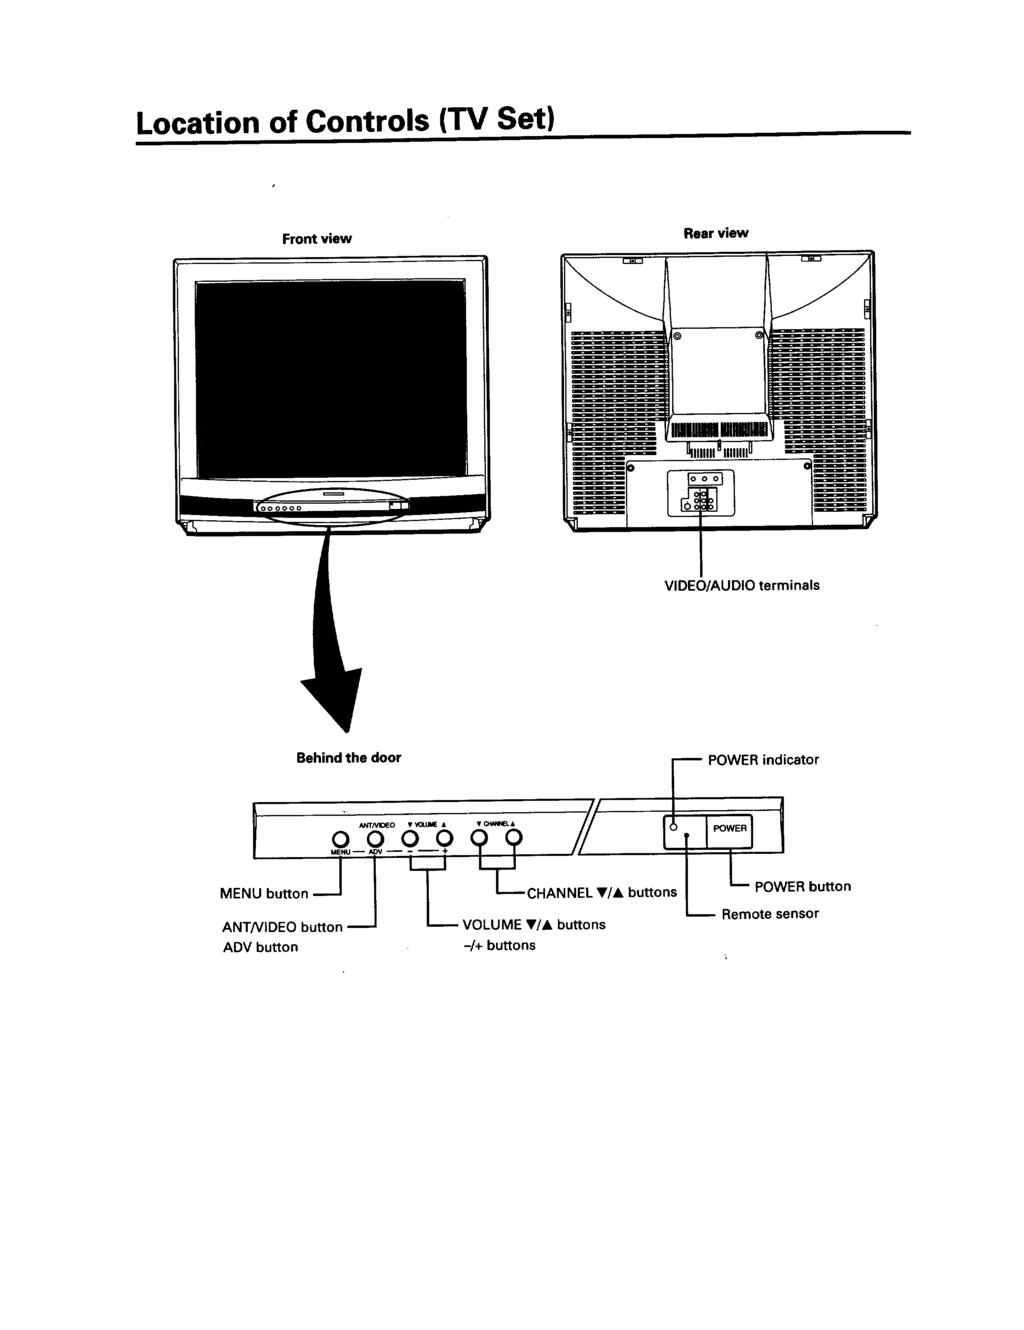 Location of Controls (TV Set) Front view Rear view VIDEO/AUDIO terinals Behind the door '_ POWER indicator